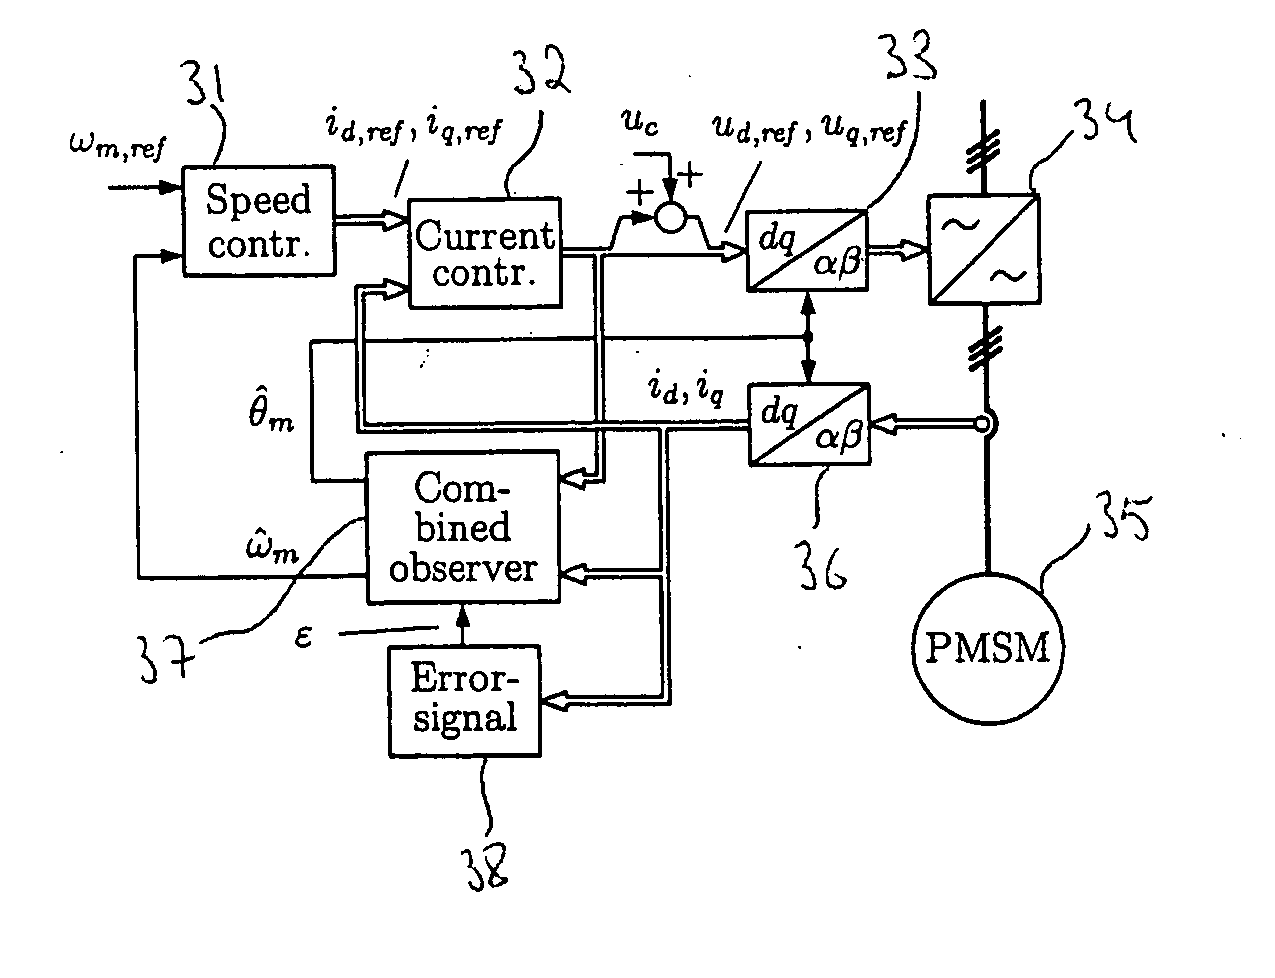 Method in connection with permanent magnet synchronous machines